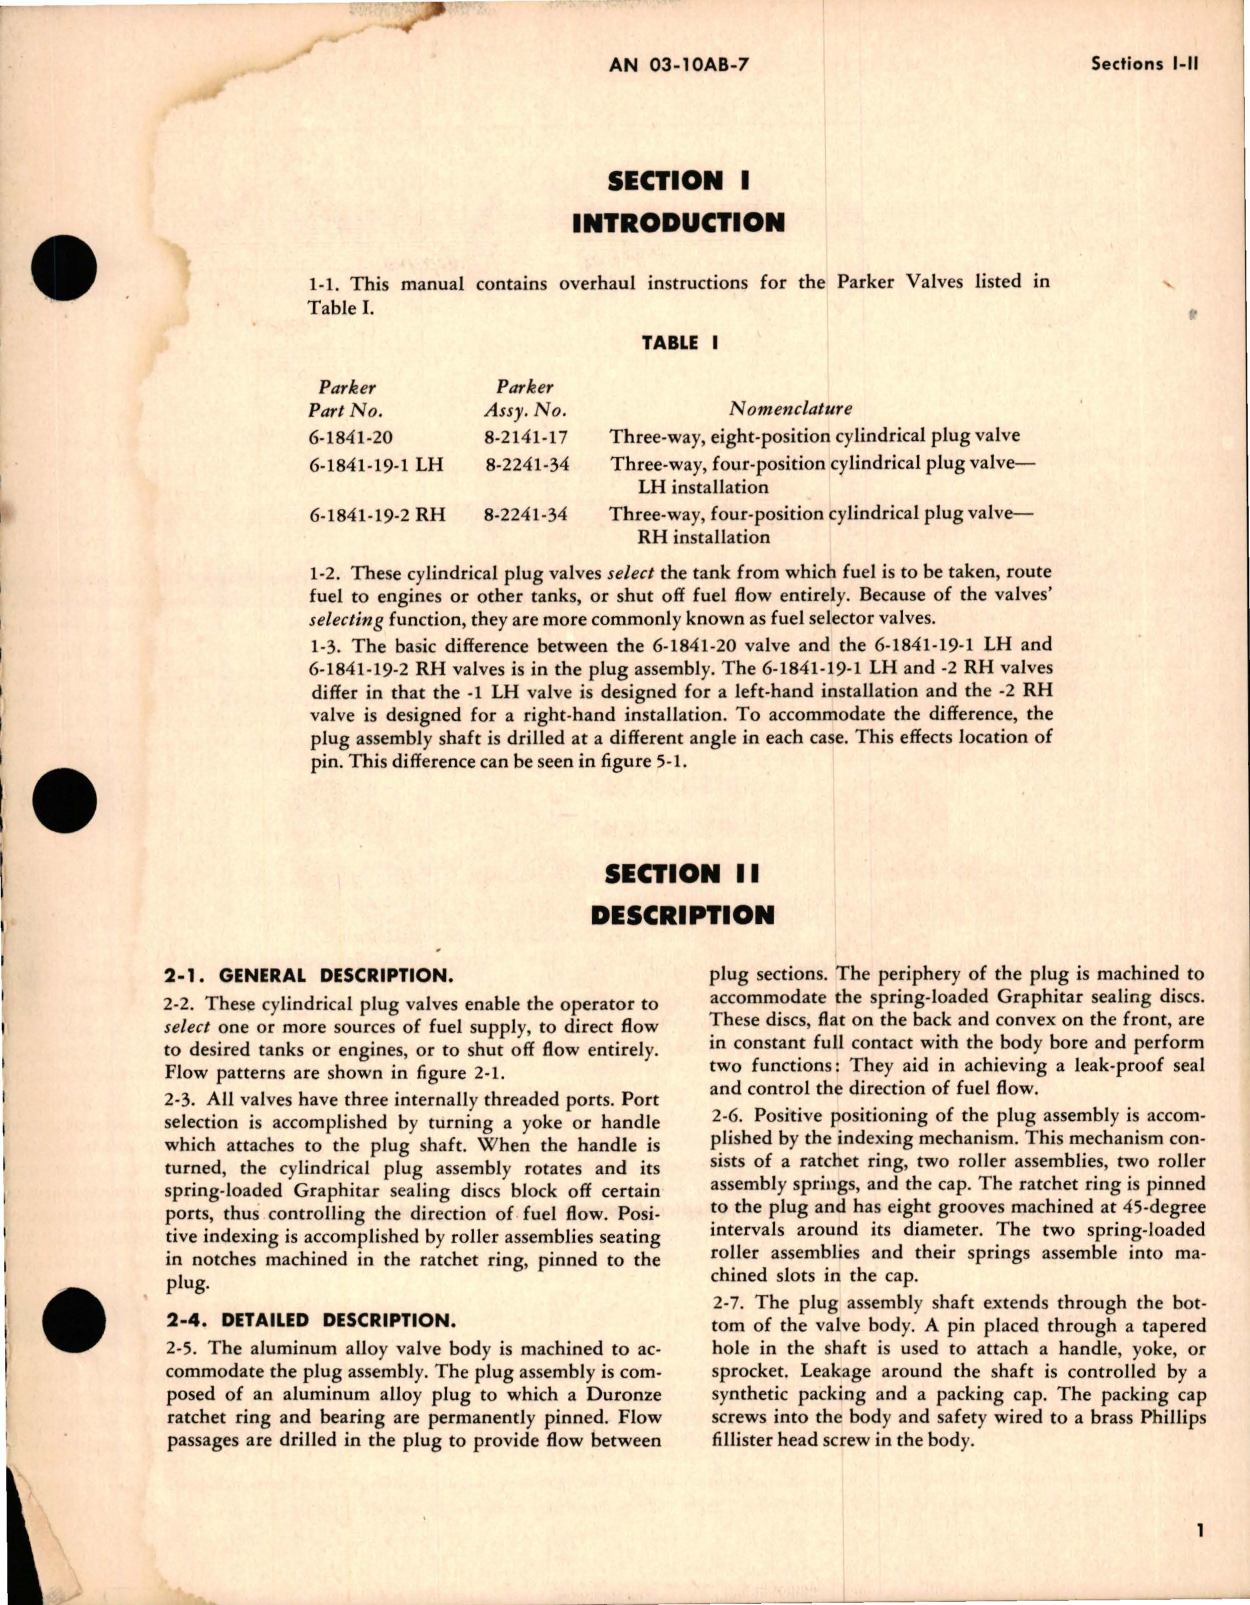 Sample page 5 from AirCorps Library document: Overhaul Instructions for Fuel Selector Valves - Cylindrical Plug Type